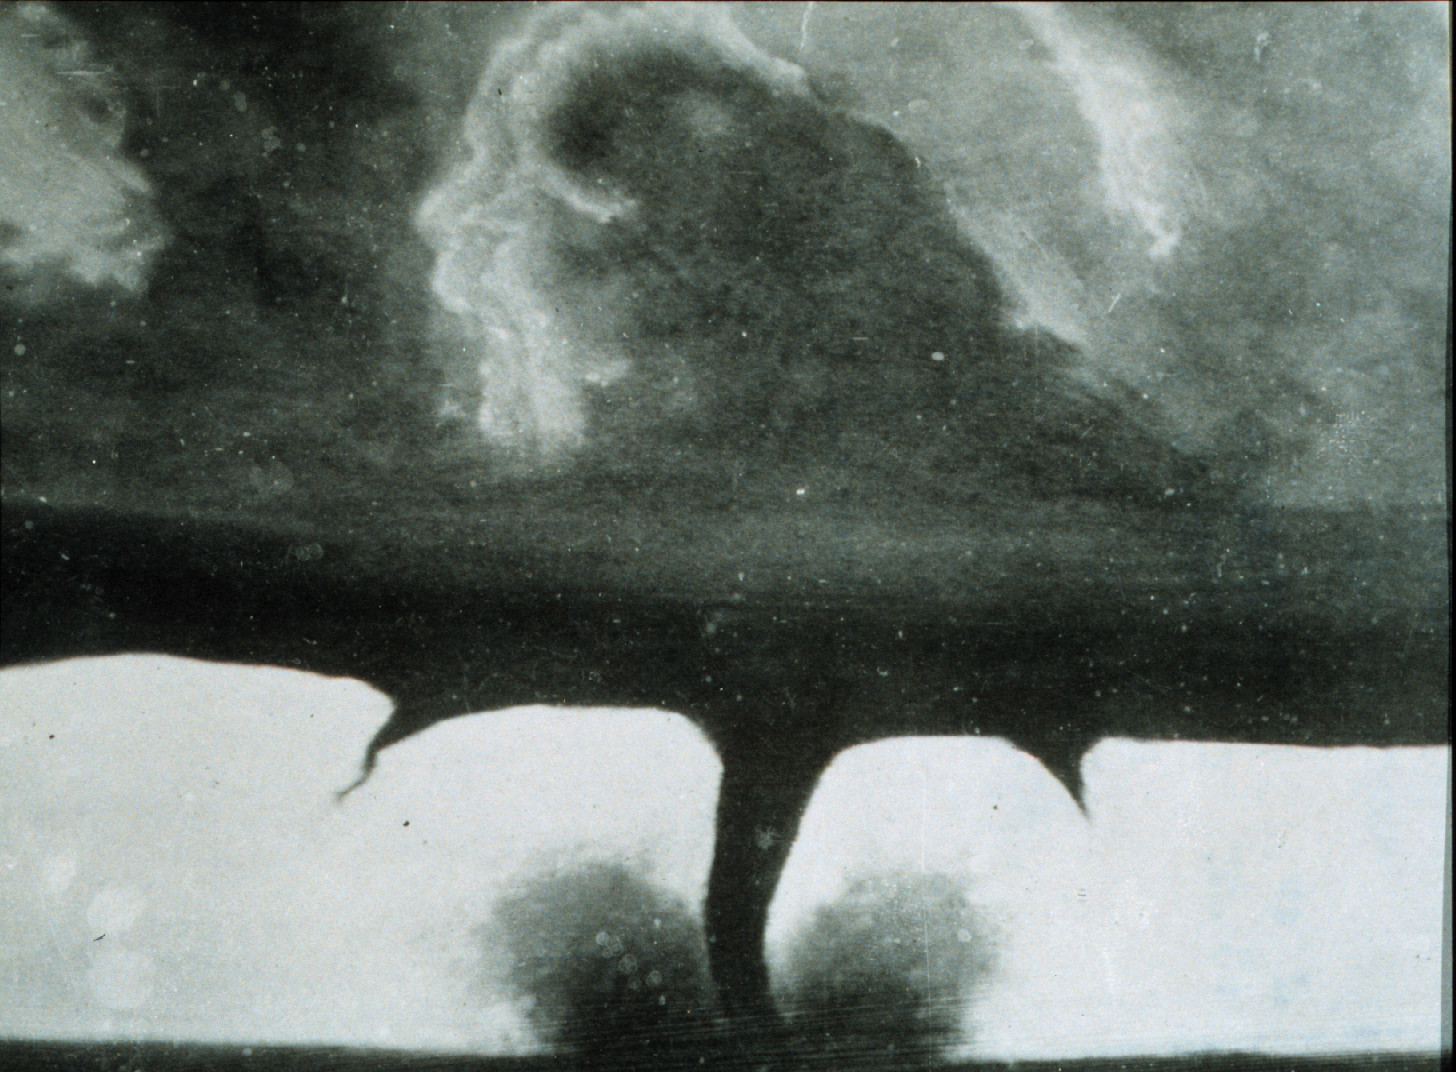 Oldest known photo of a tornado, taken about 20 miles SW of Howard, South Dakota, United States. August 28th, 1884